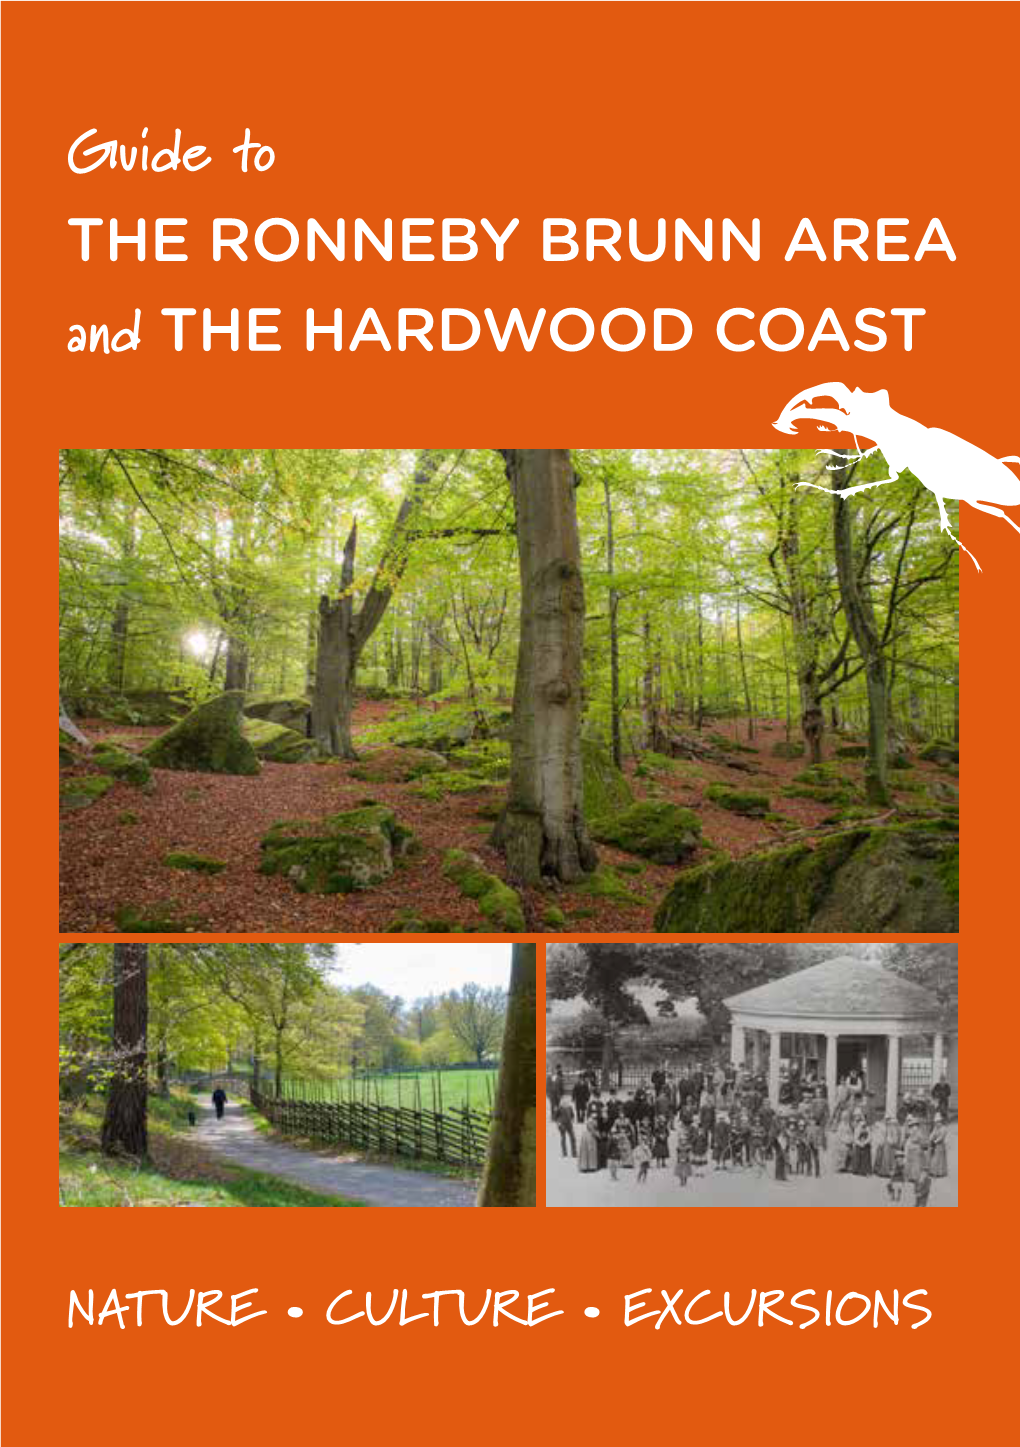 Guide to Ronneby Brunn Area